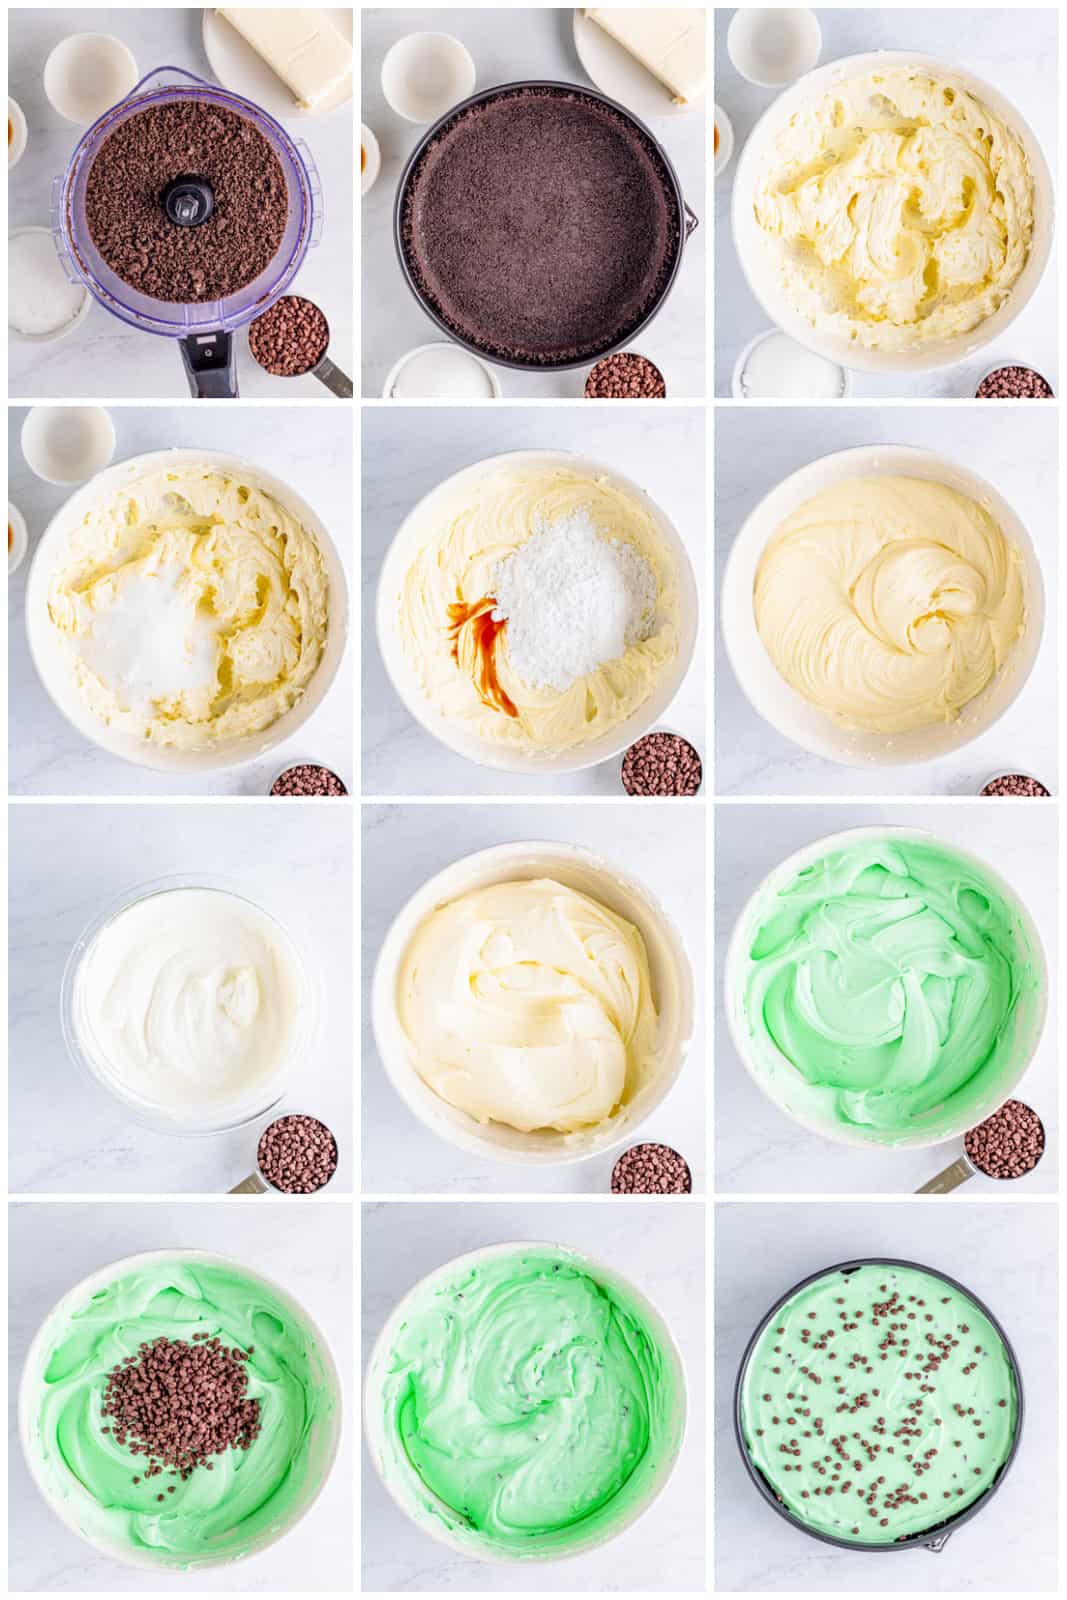 Step by step photos on how to make Mint Chocolate Cheesecake.